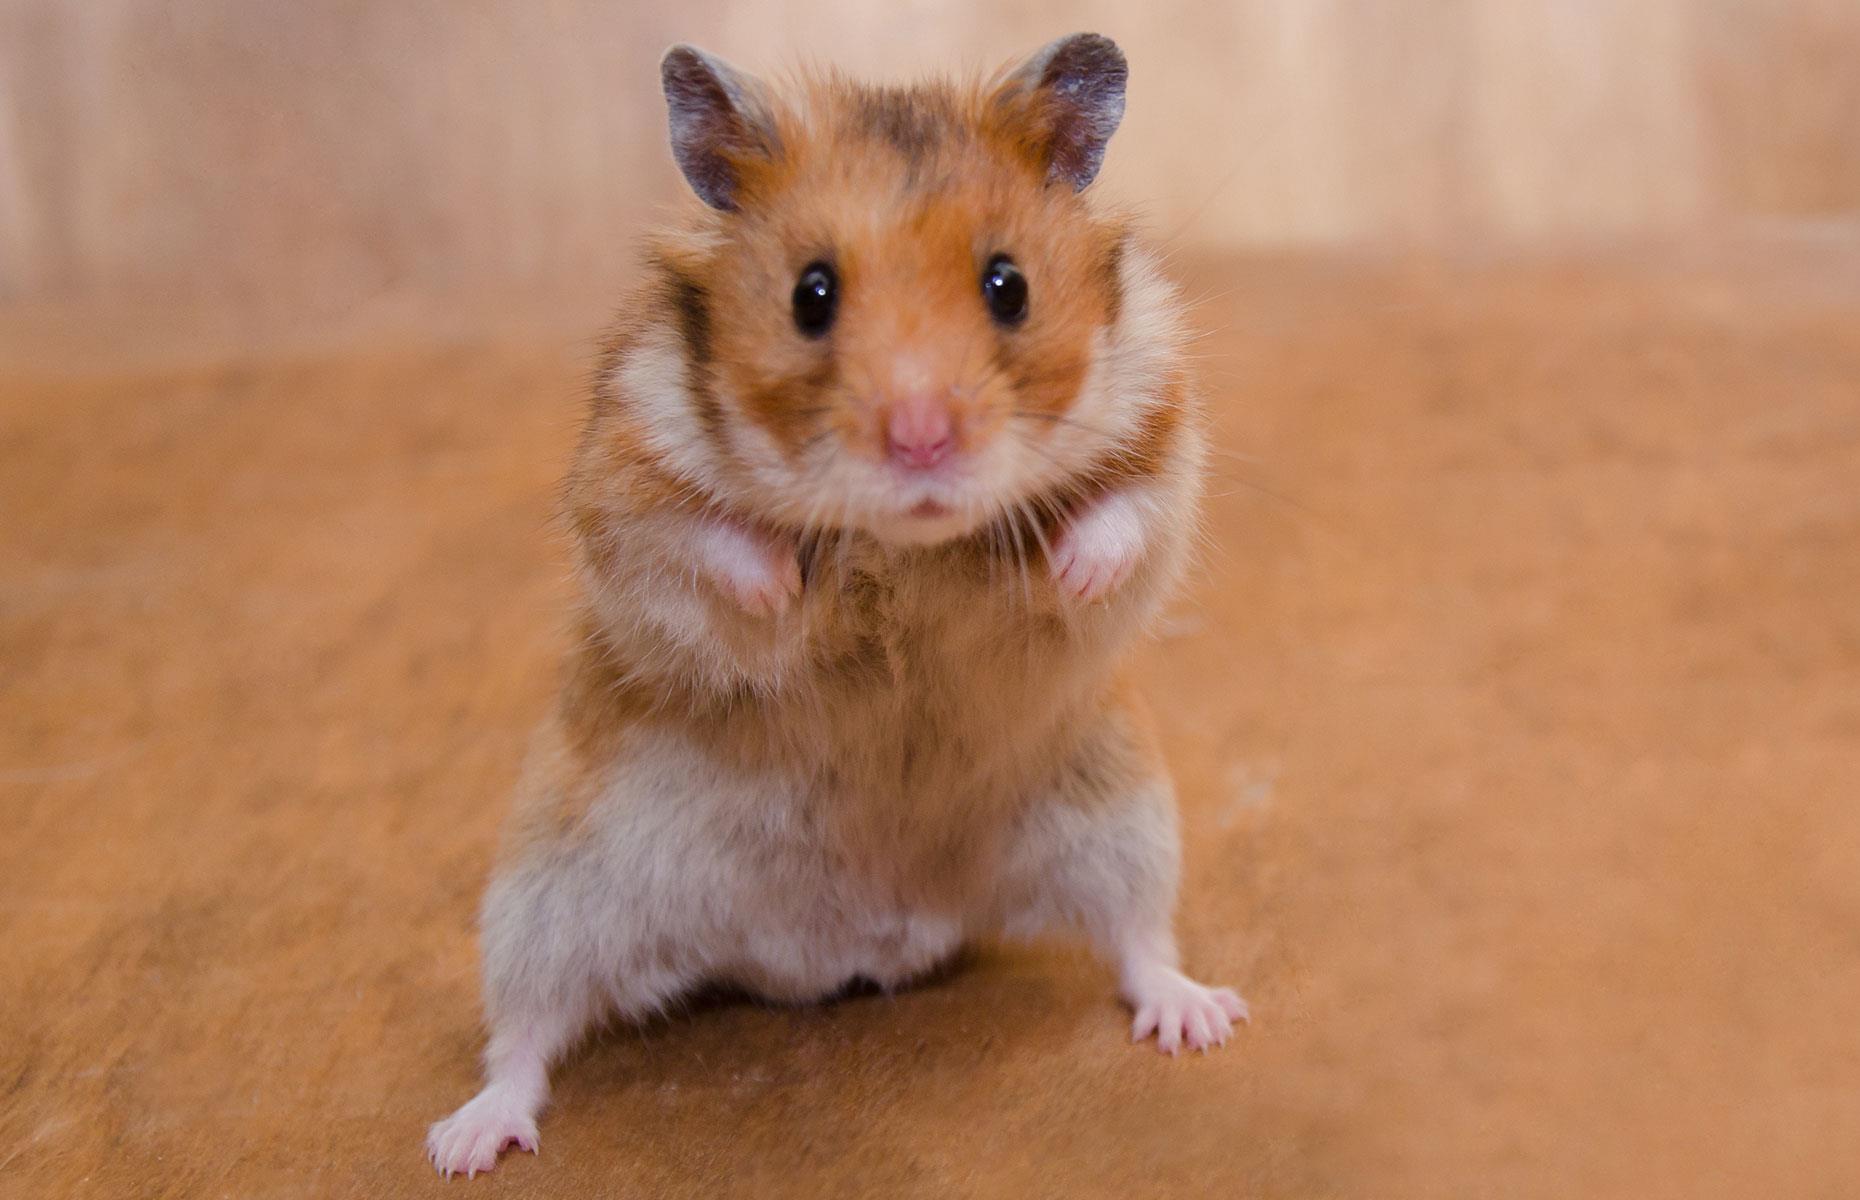 Study watching hamster cage fights: $3 million